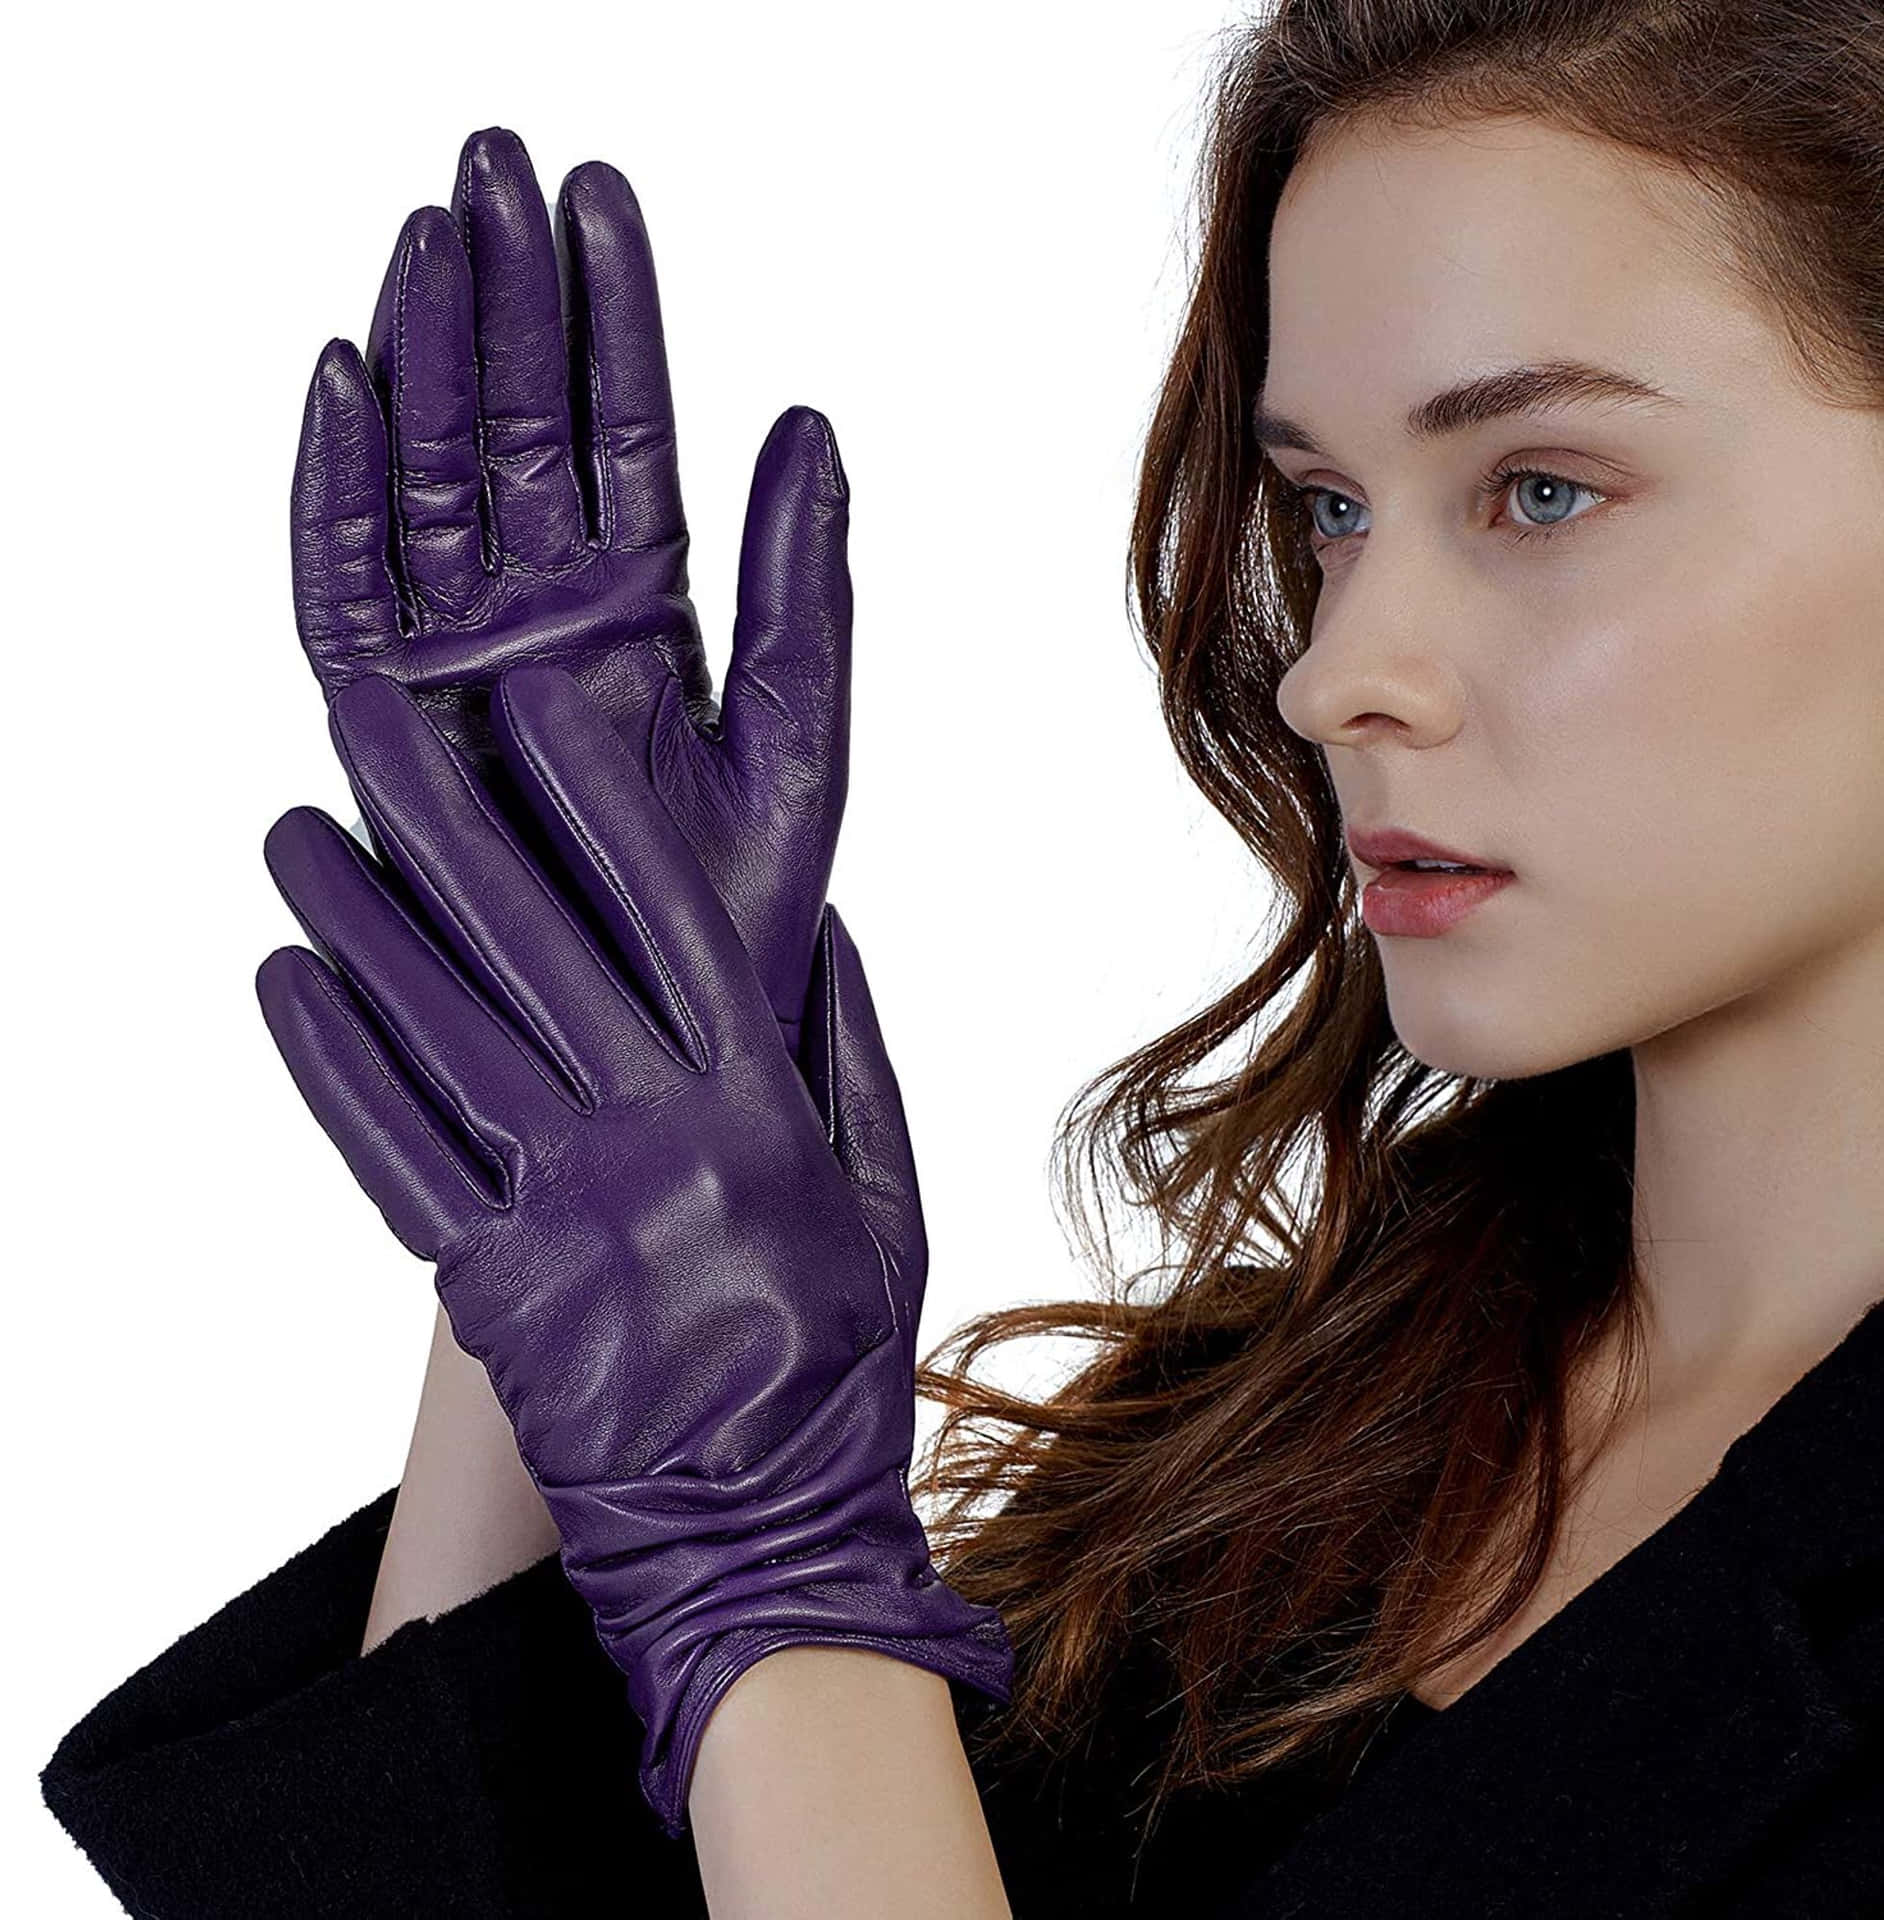 Accessorize Yourself with These Purple Gloves Wallpaper